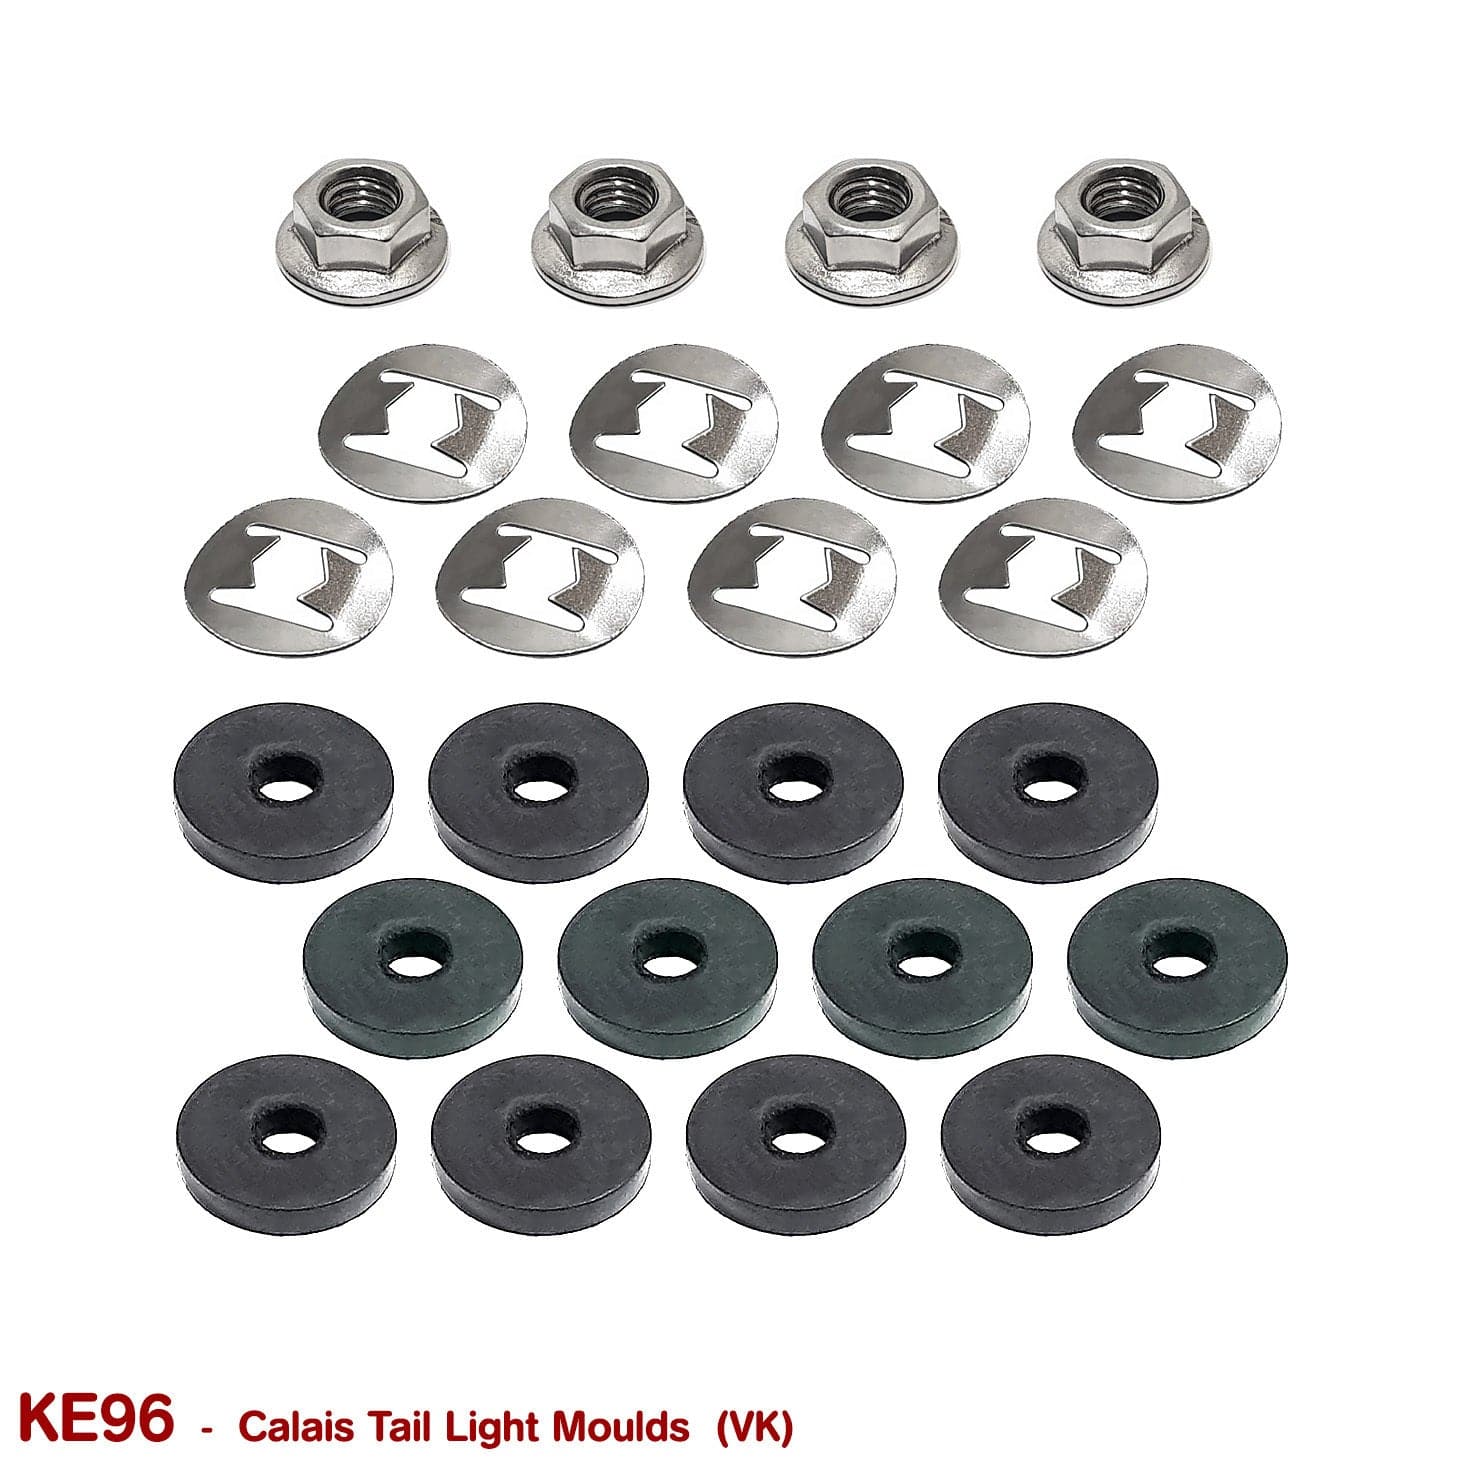 TAIL LIGHT MOULD FASTENERS for VK CALAIS